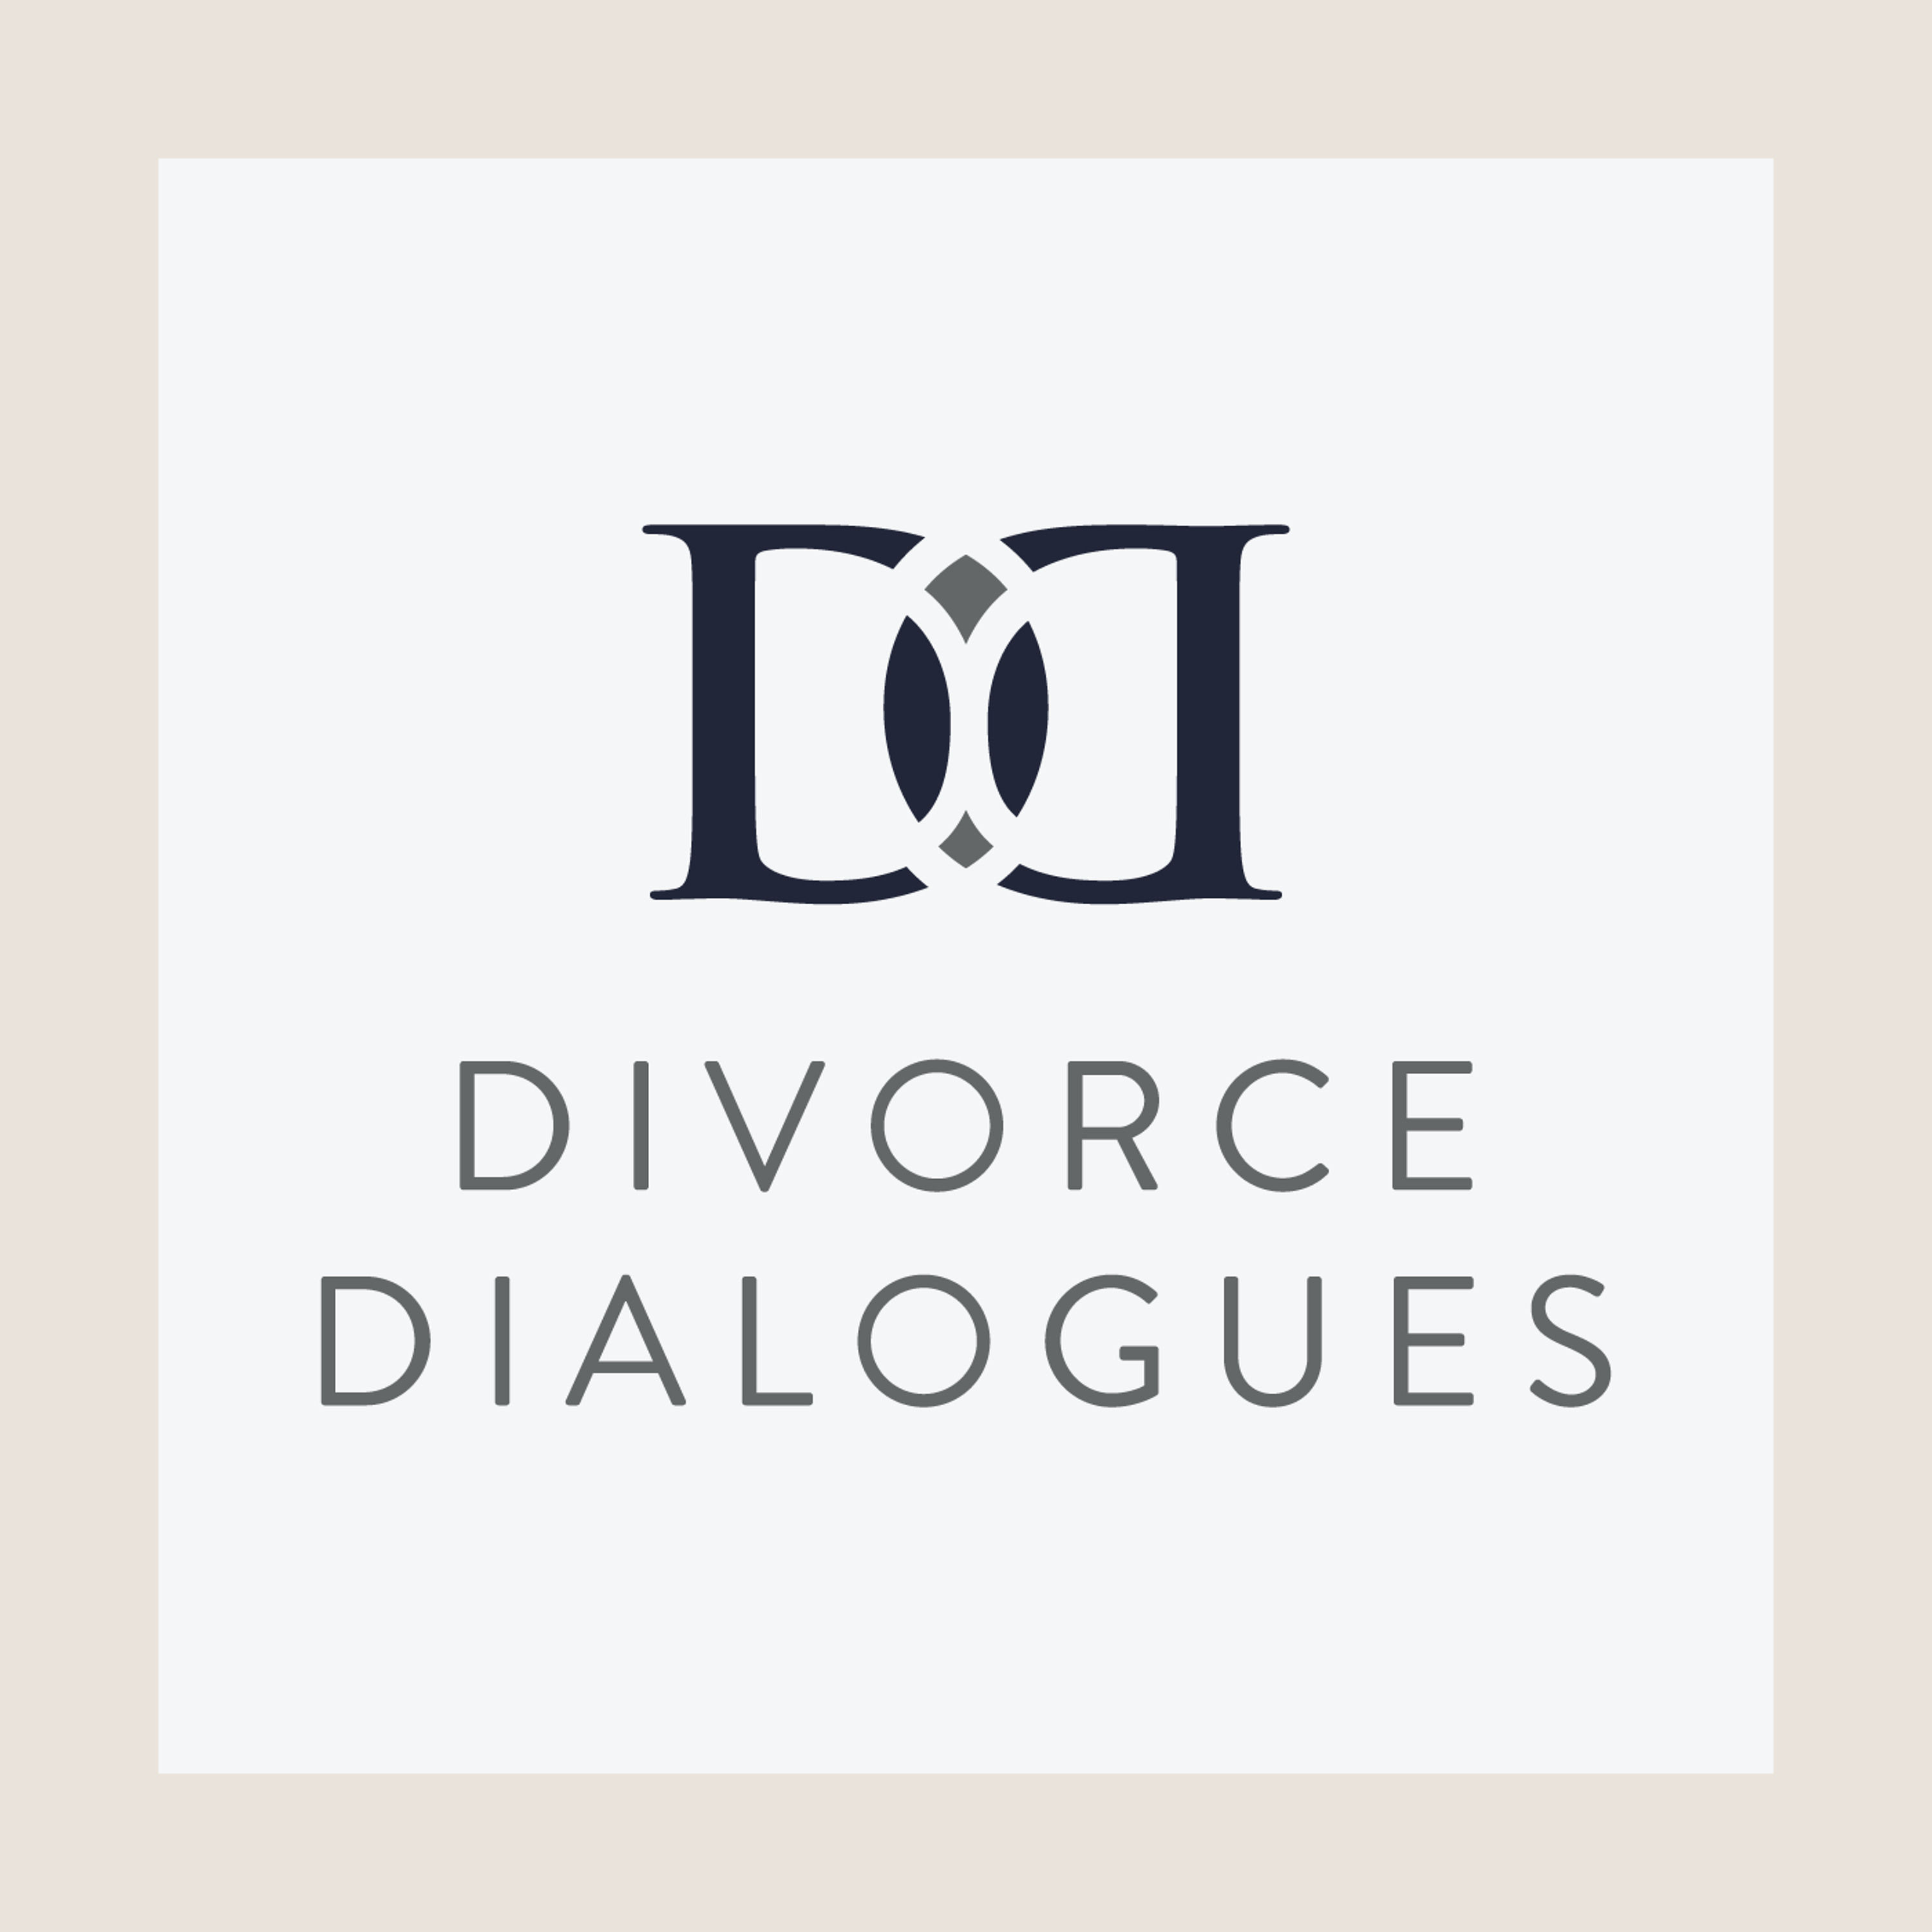 Divorce Dialogues - A Me-First Approach to Dating After Divorce with Bernadette Smith